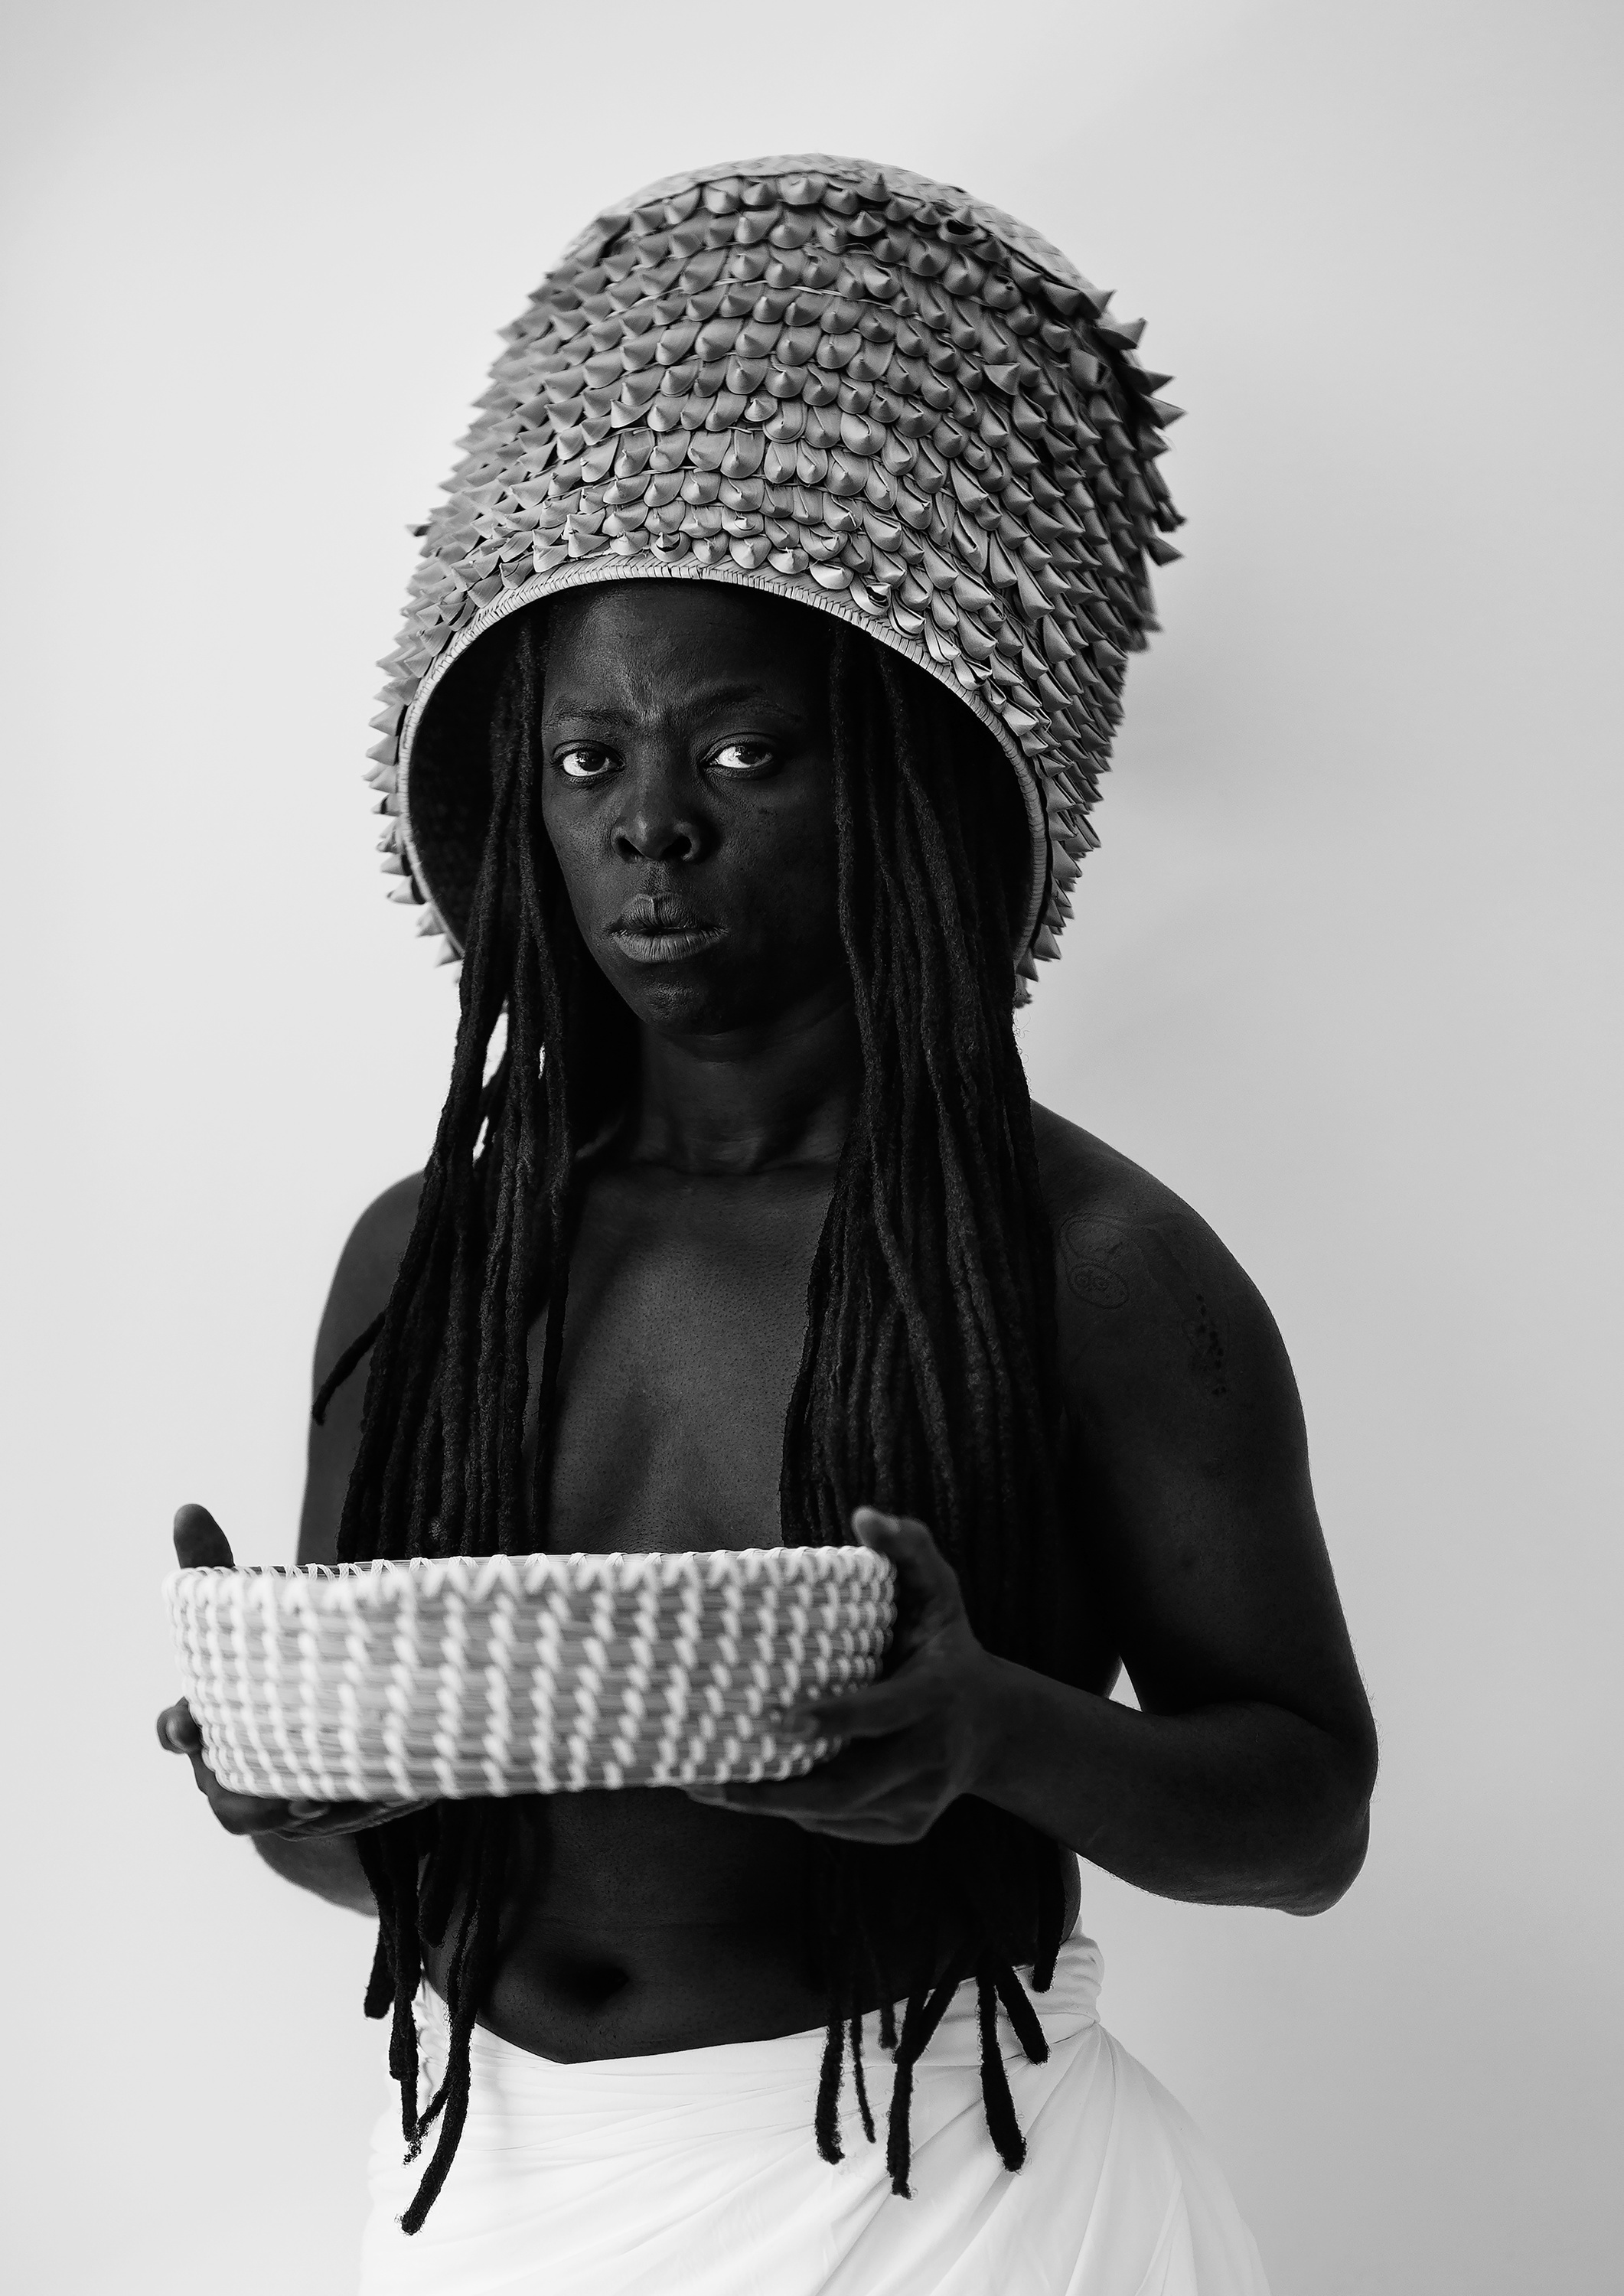 Zanele Muholi’s monochrome photograph ‘Hlanzeka III, Vineyard Hotel, Room 153, Cape Town, 2017’ shows the artist standing in front of a white backdrop holding a basket.
